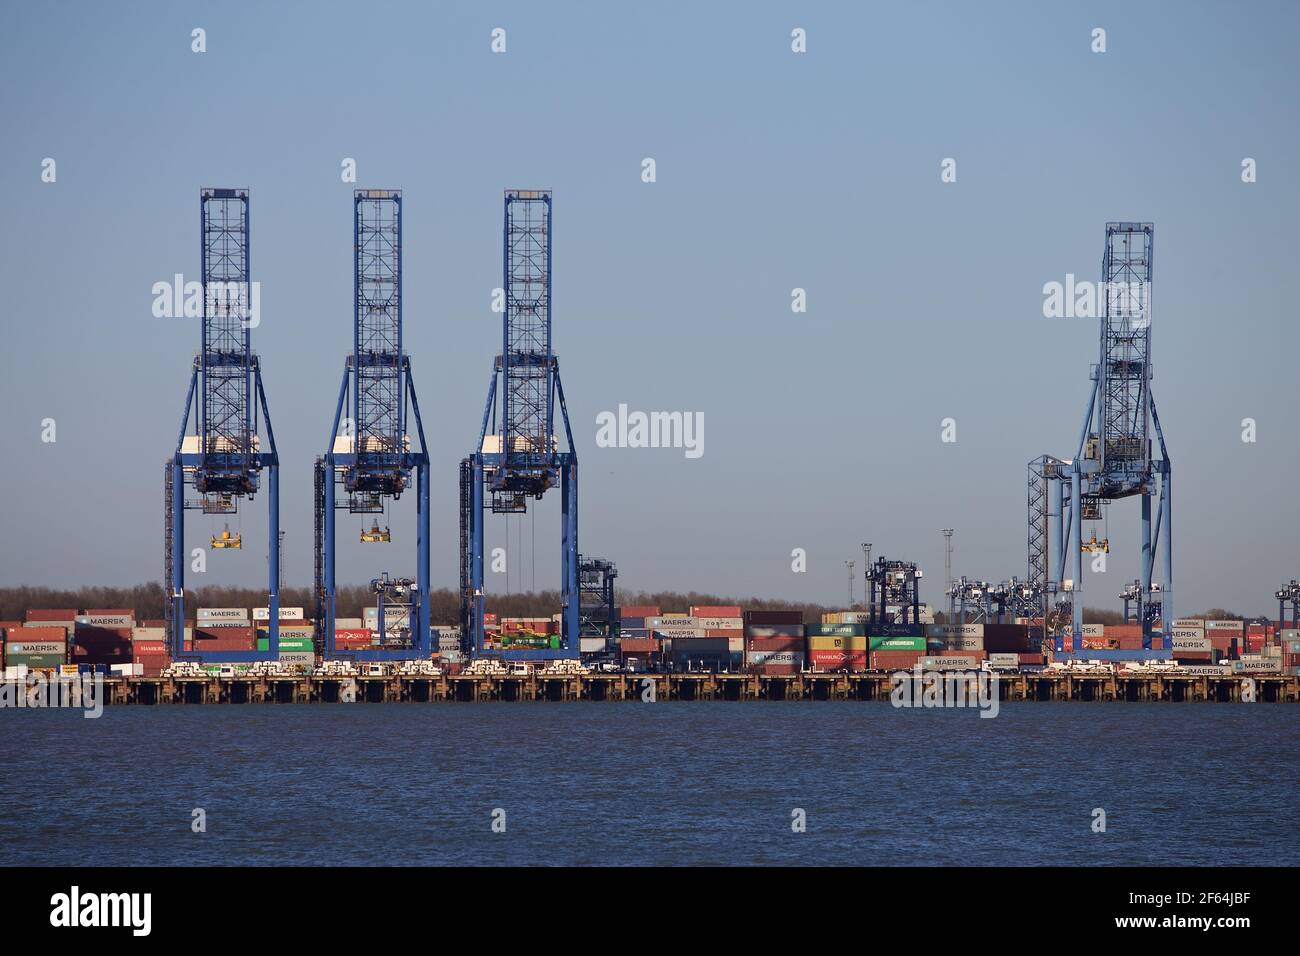 Gantry cranes stand idle (29 March 2021) due to shipping delays caused by the container ship Ever Given running aground and blocking the Suez Canal. Stock Photo